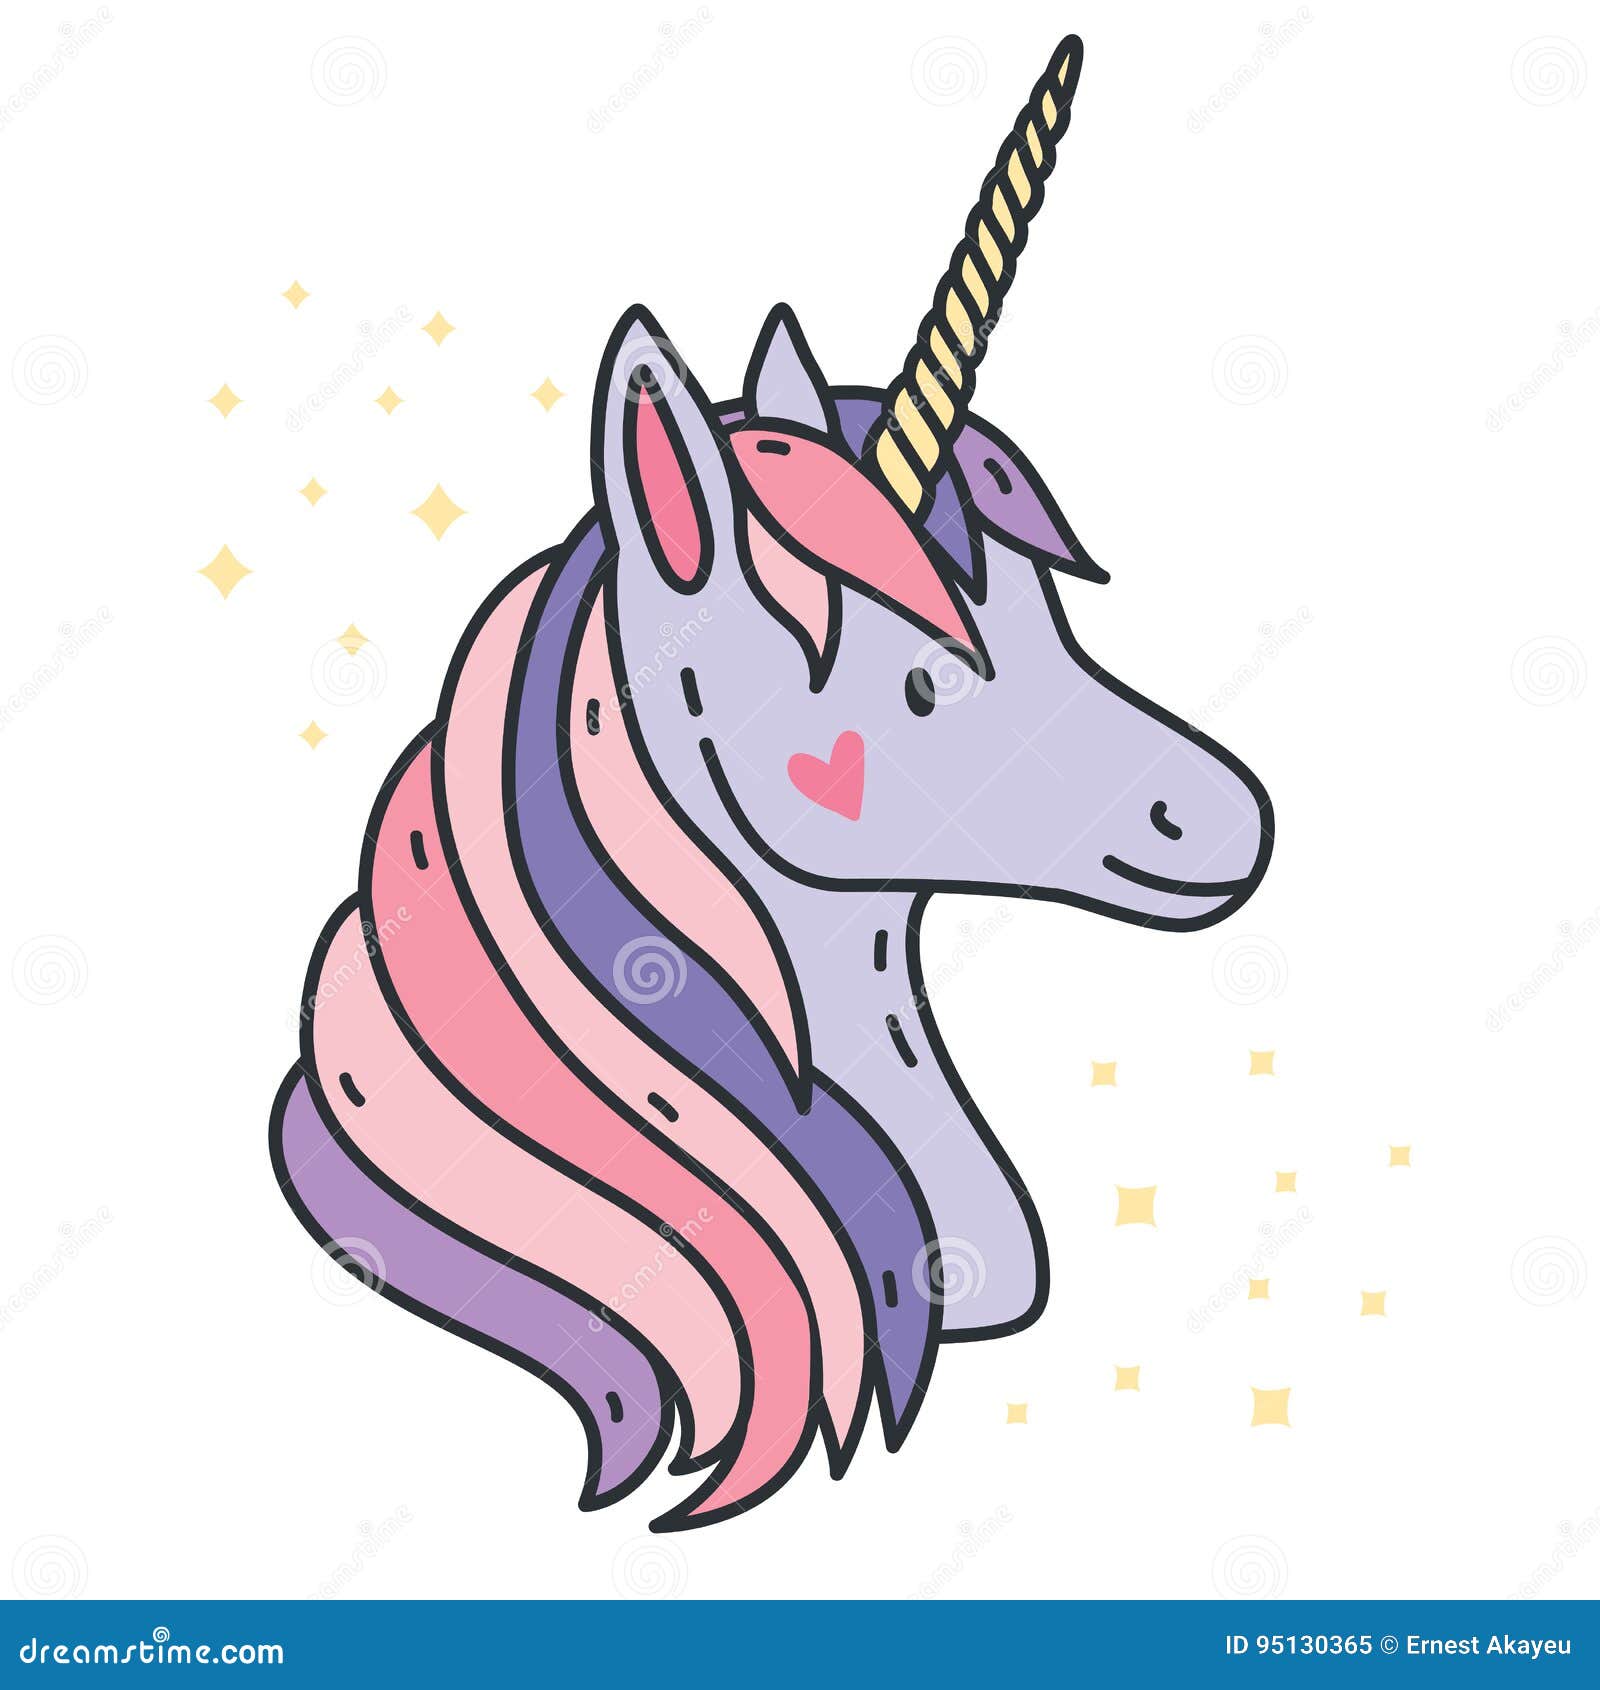 portrait of cute unicorn. purple fantasy animal with horn. side view. colorful   in cartoon style.